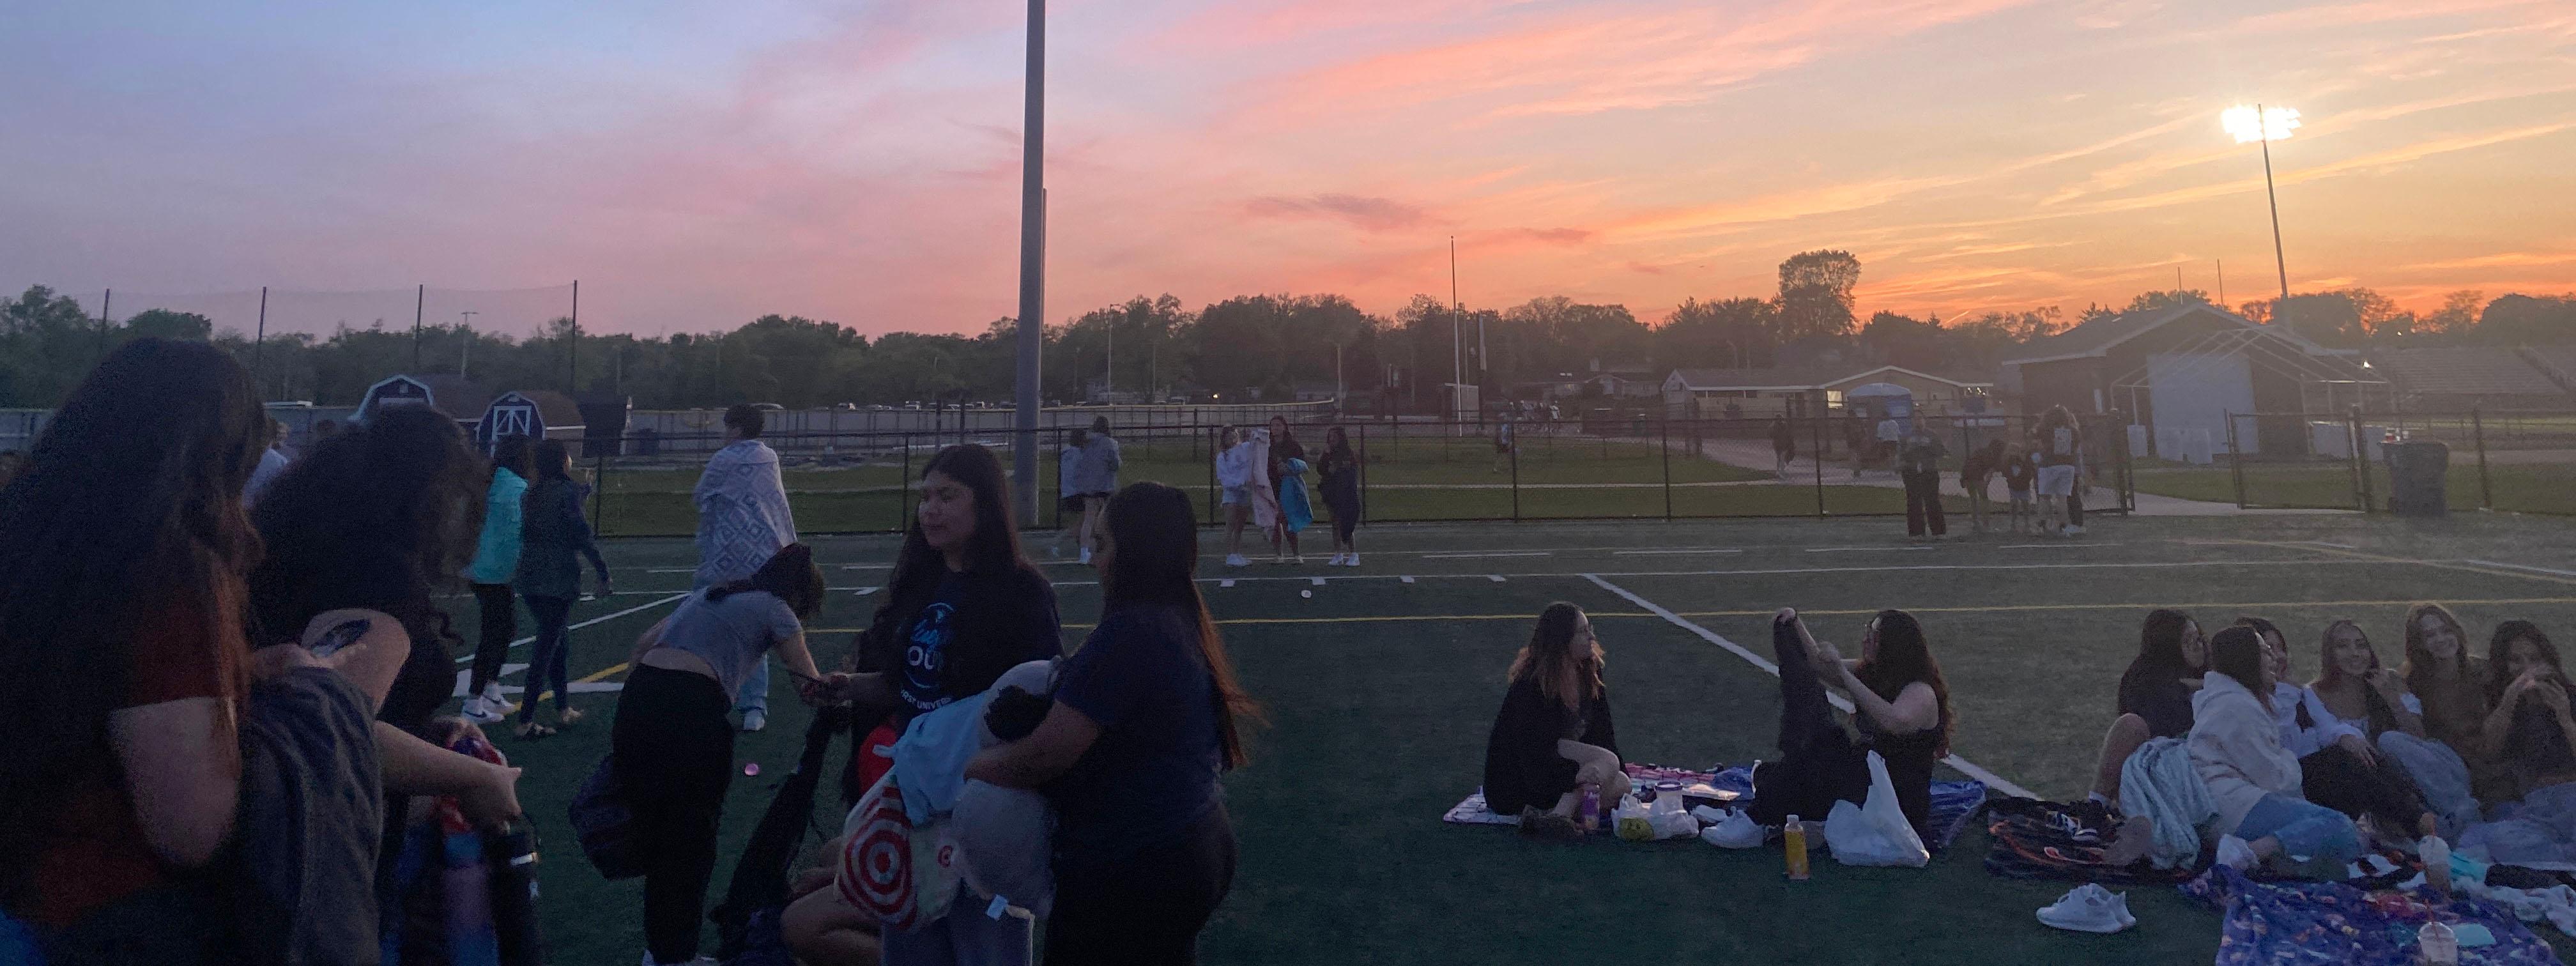 Members of the Addison Trail class of 2023 host Senior Sunset event to celebrate end of 2022-23 school year